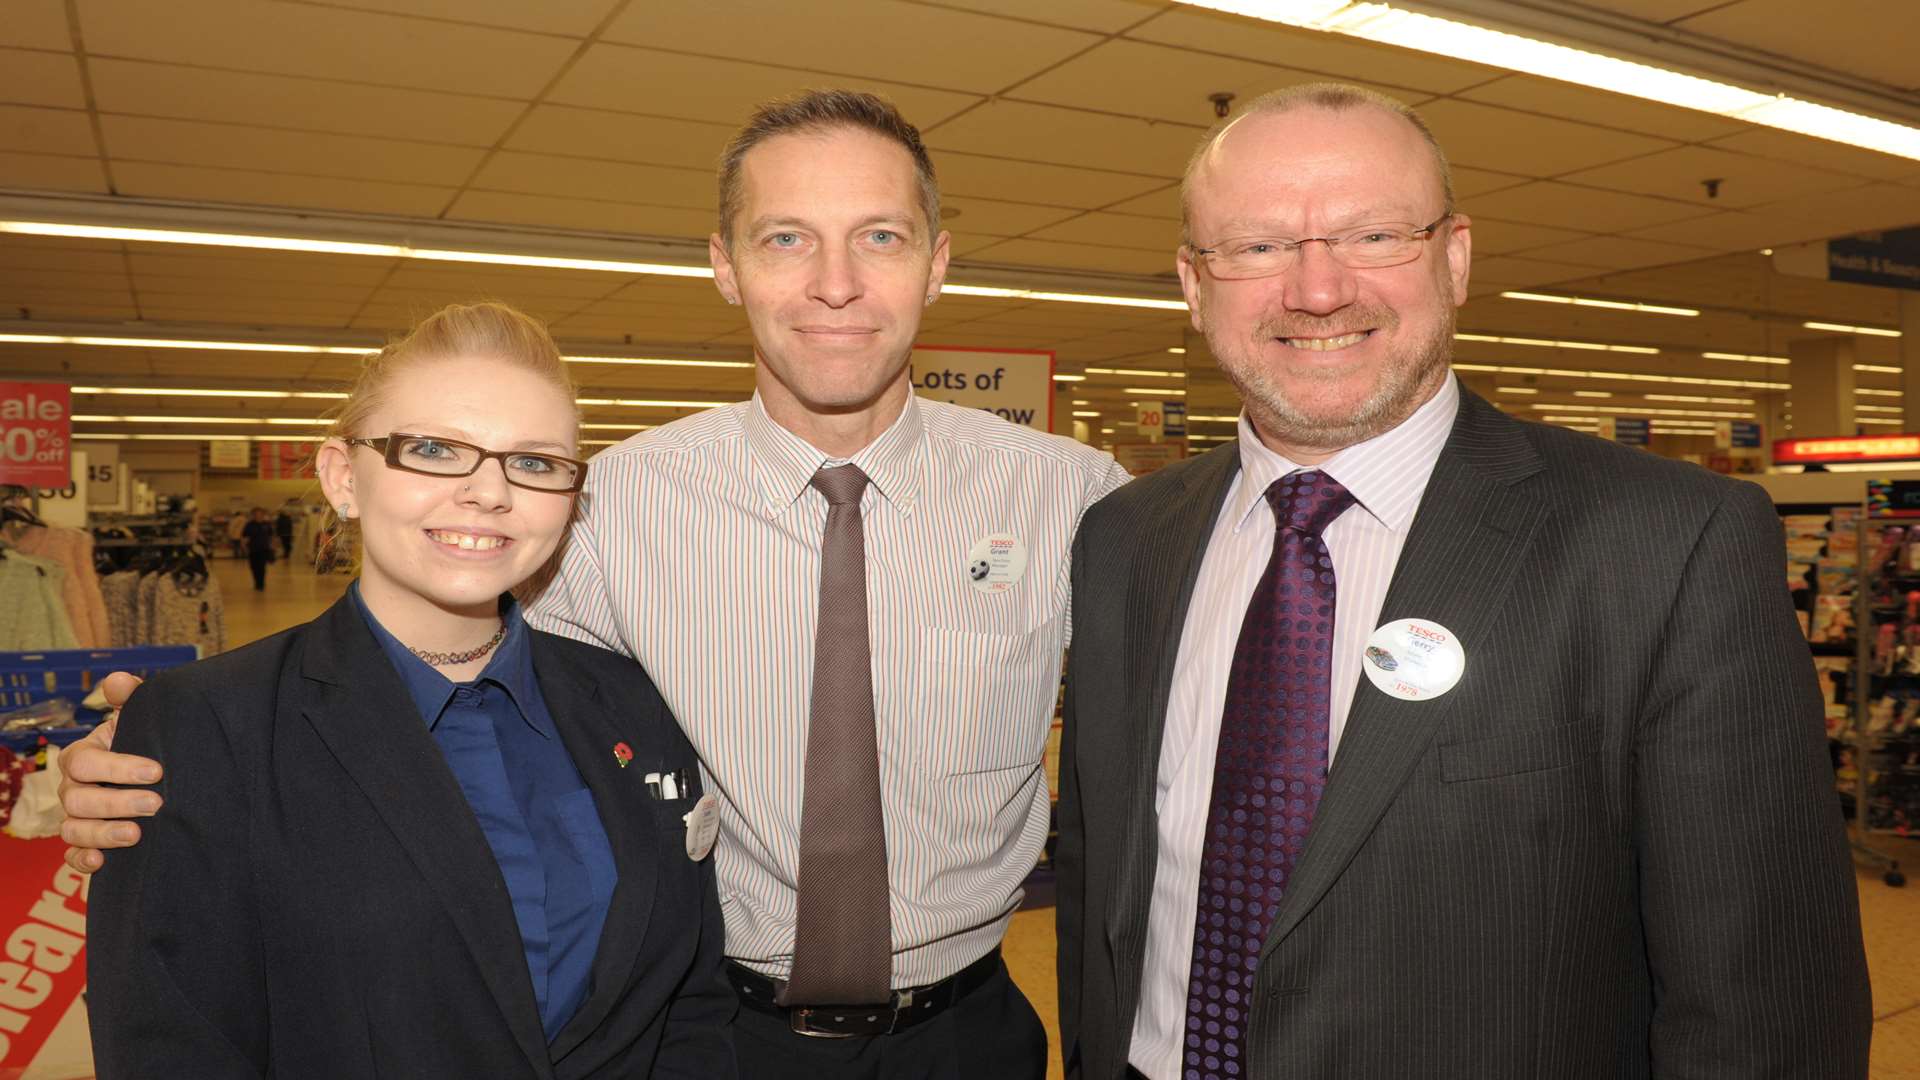 Grant (centre), pictured with manager Gerry Byrne and Jade Pollitt, was dared to have the procedure after a making a "foolhardy error" in the work canteen. Picture: Steve Crispe.